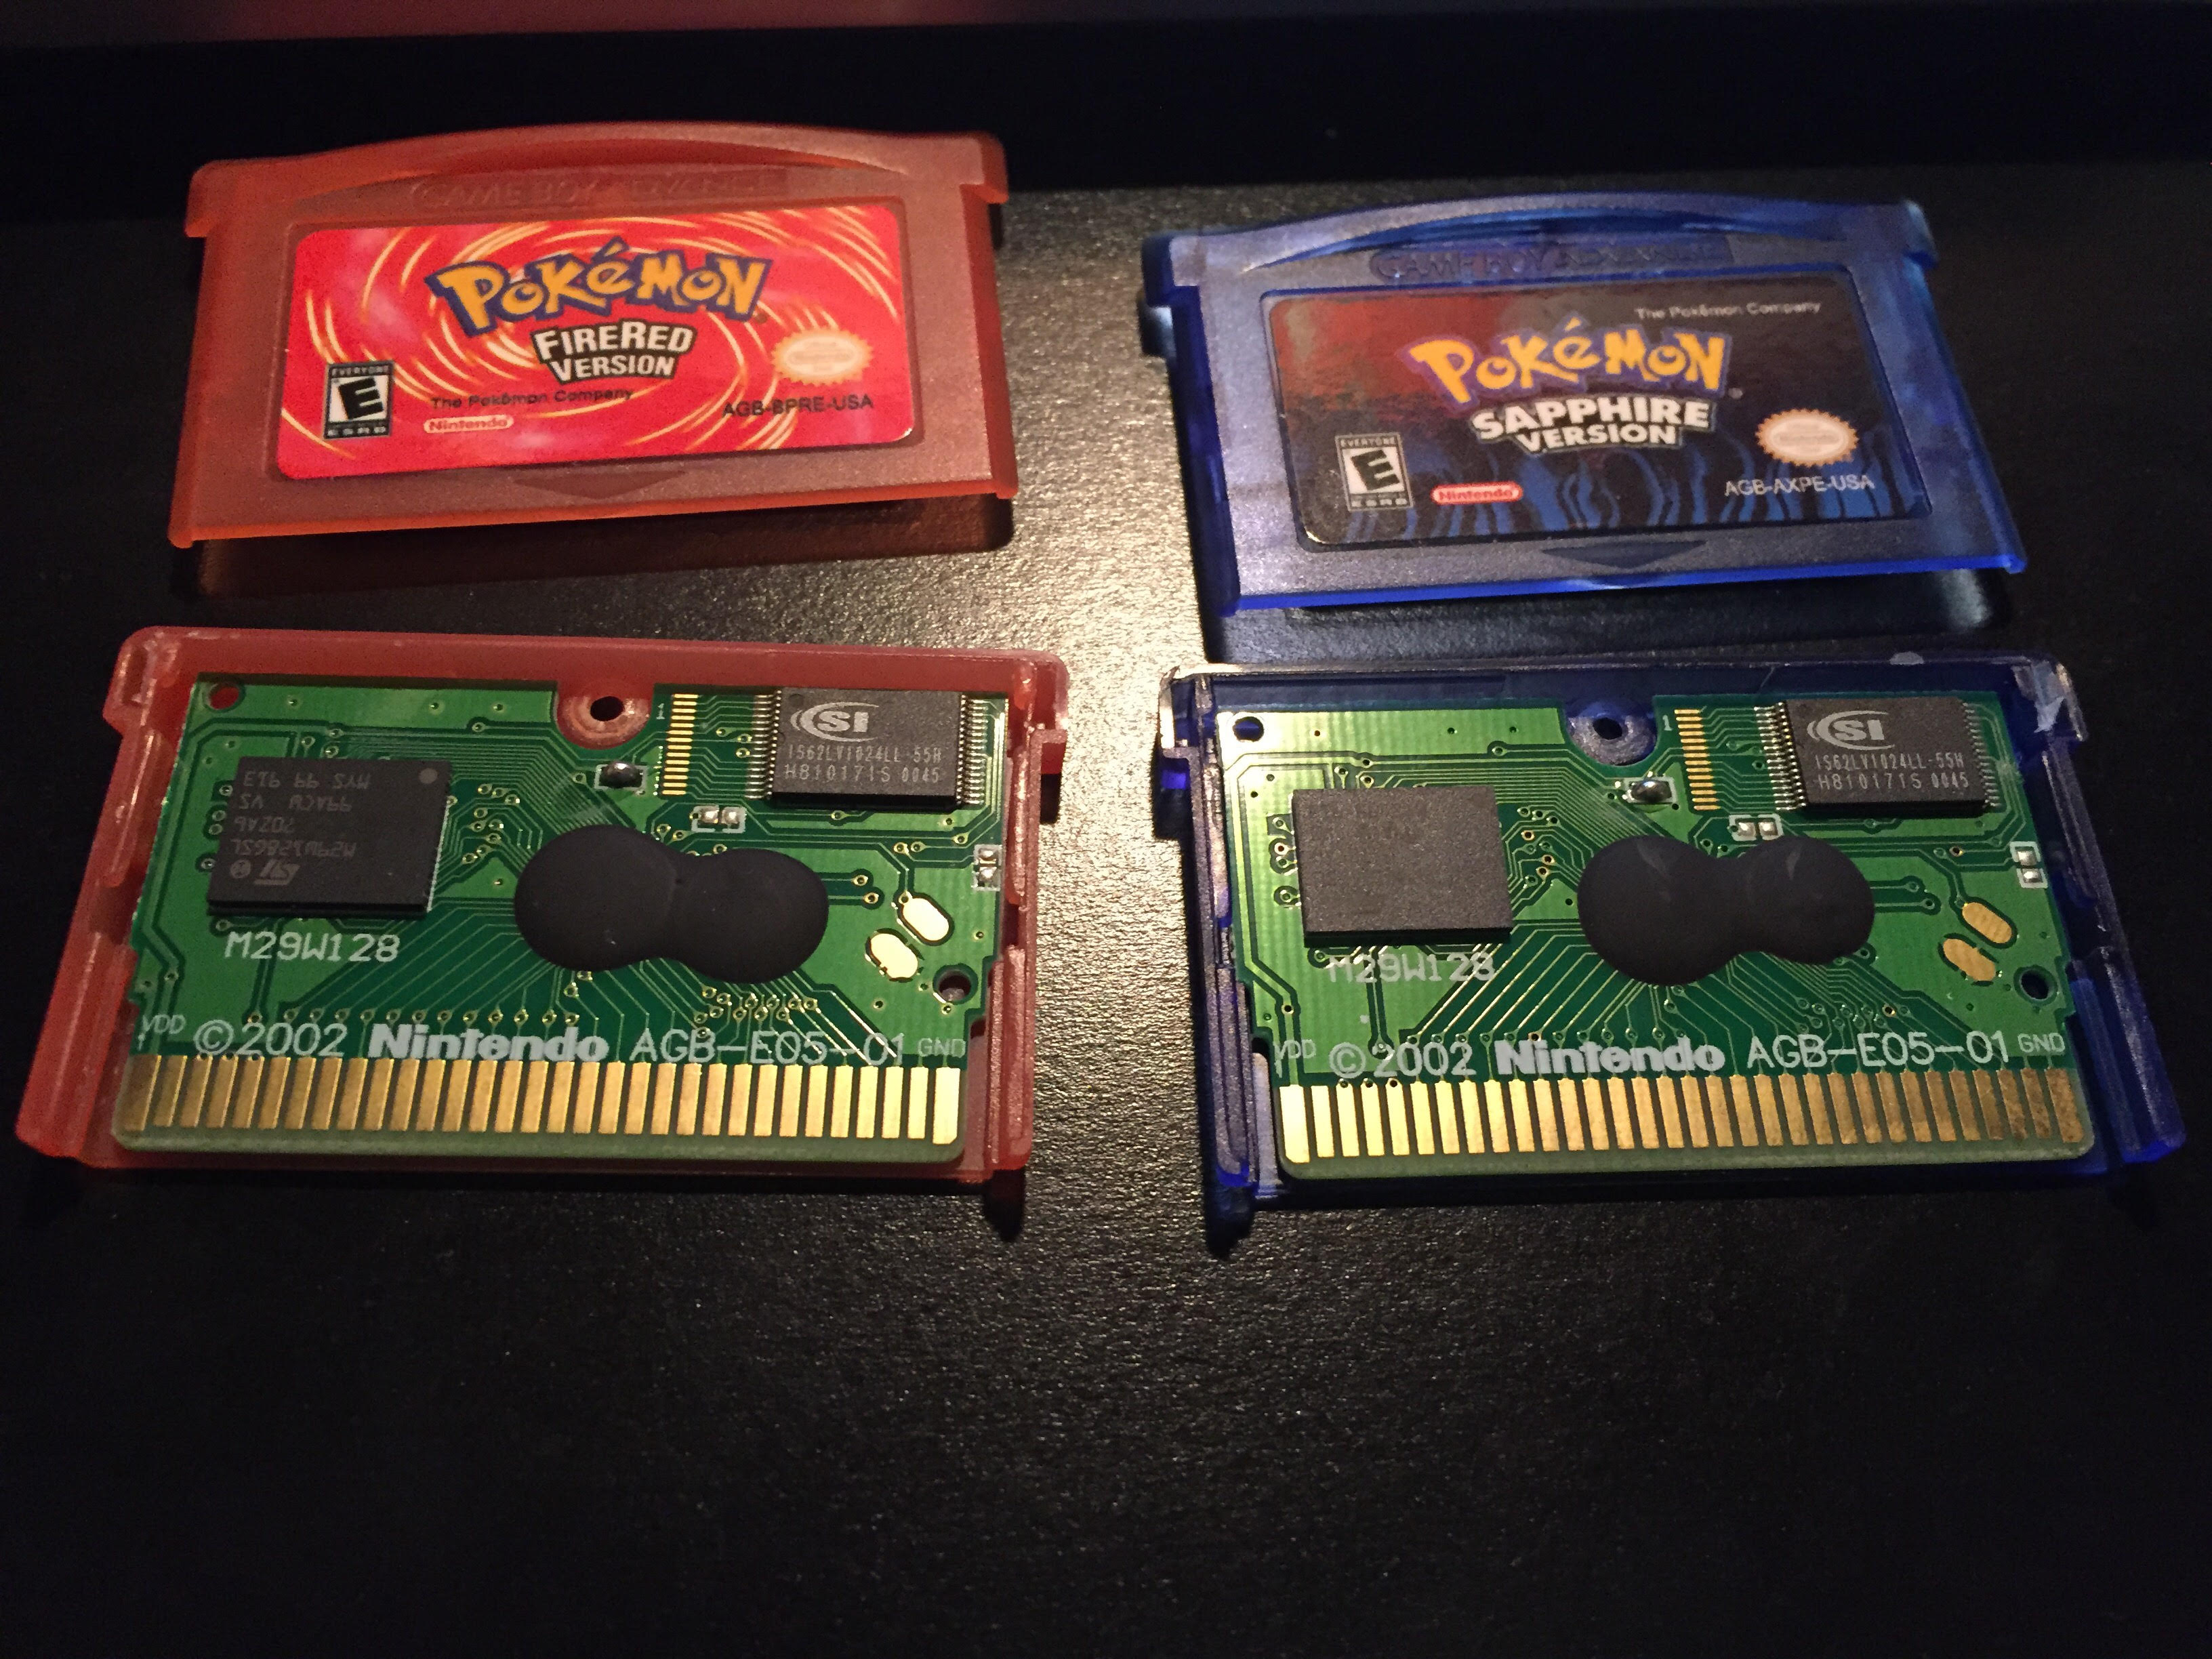 Pokemon FireRed - Fake vs Real Comparison for Gameboy Advance 